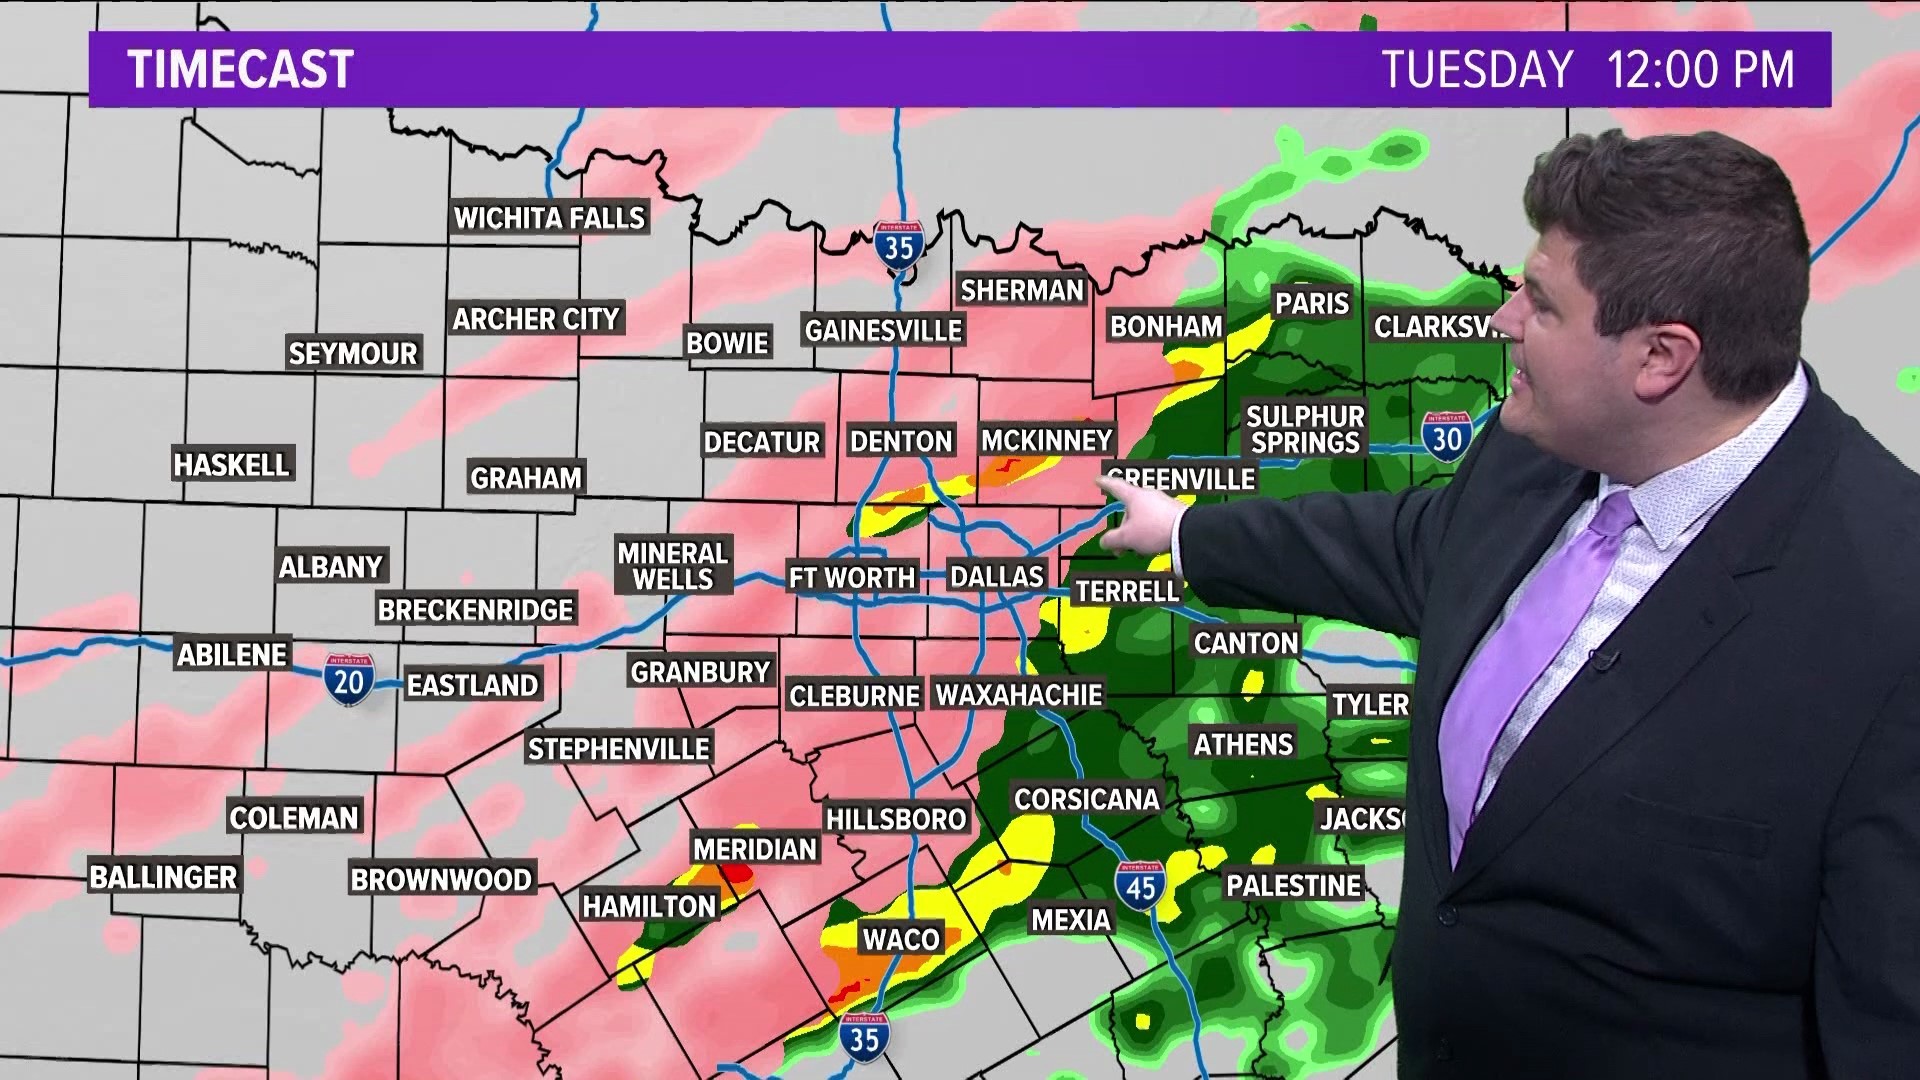 Freezing rain and icy conditions are expected in North Texas this week. Here's what to expect and when.